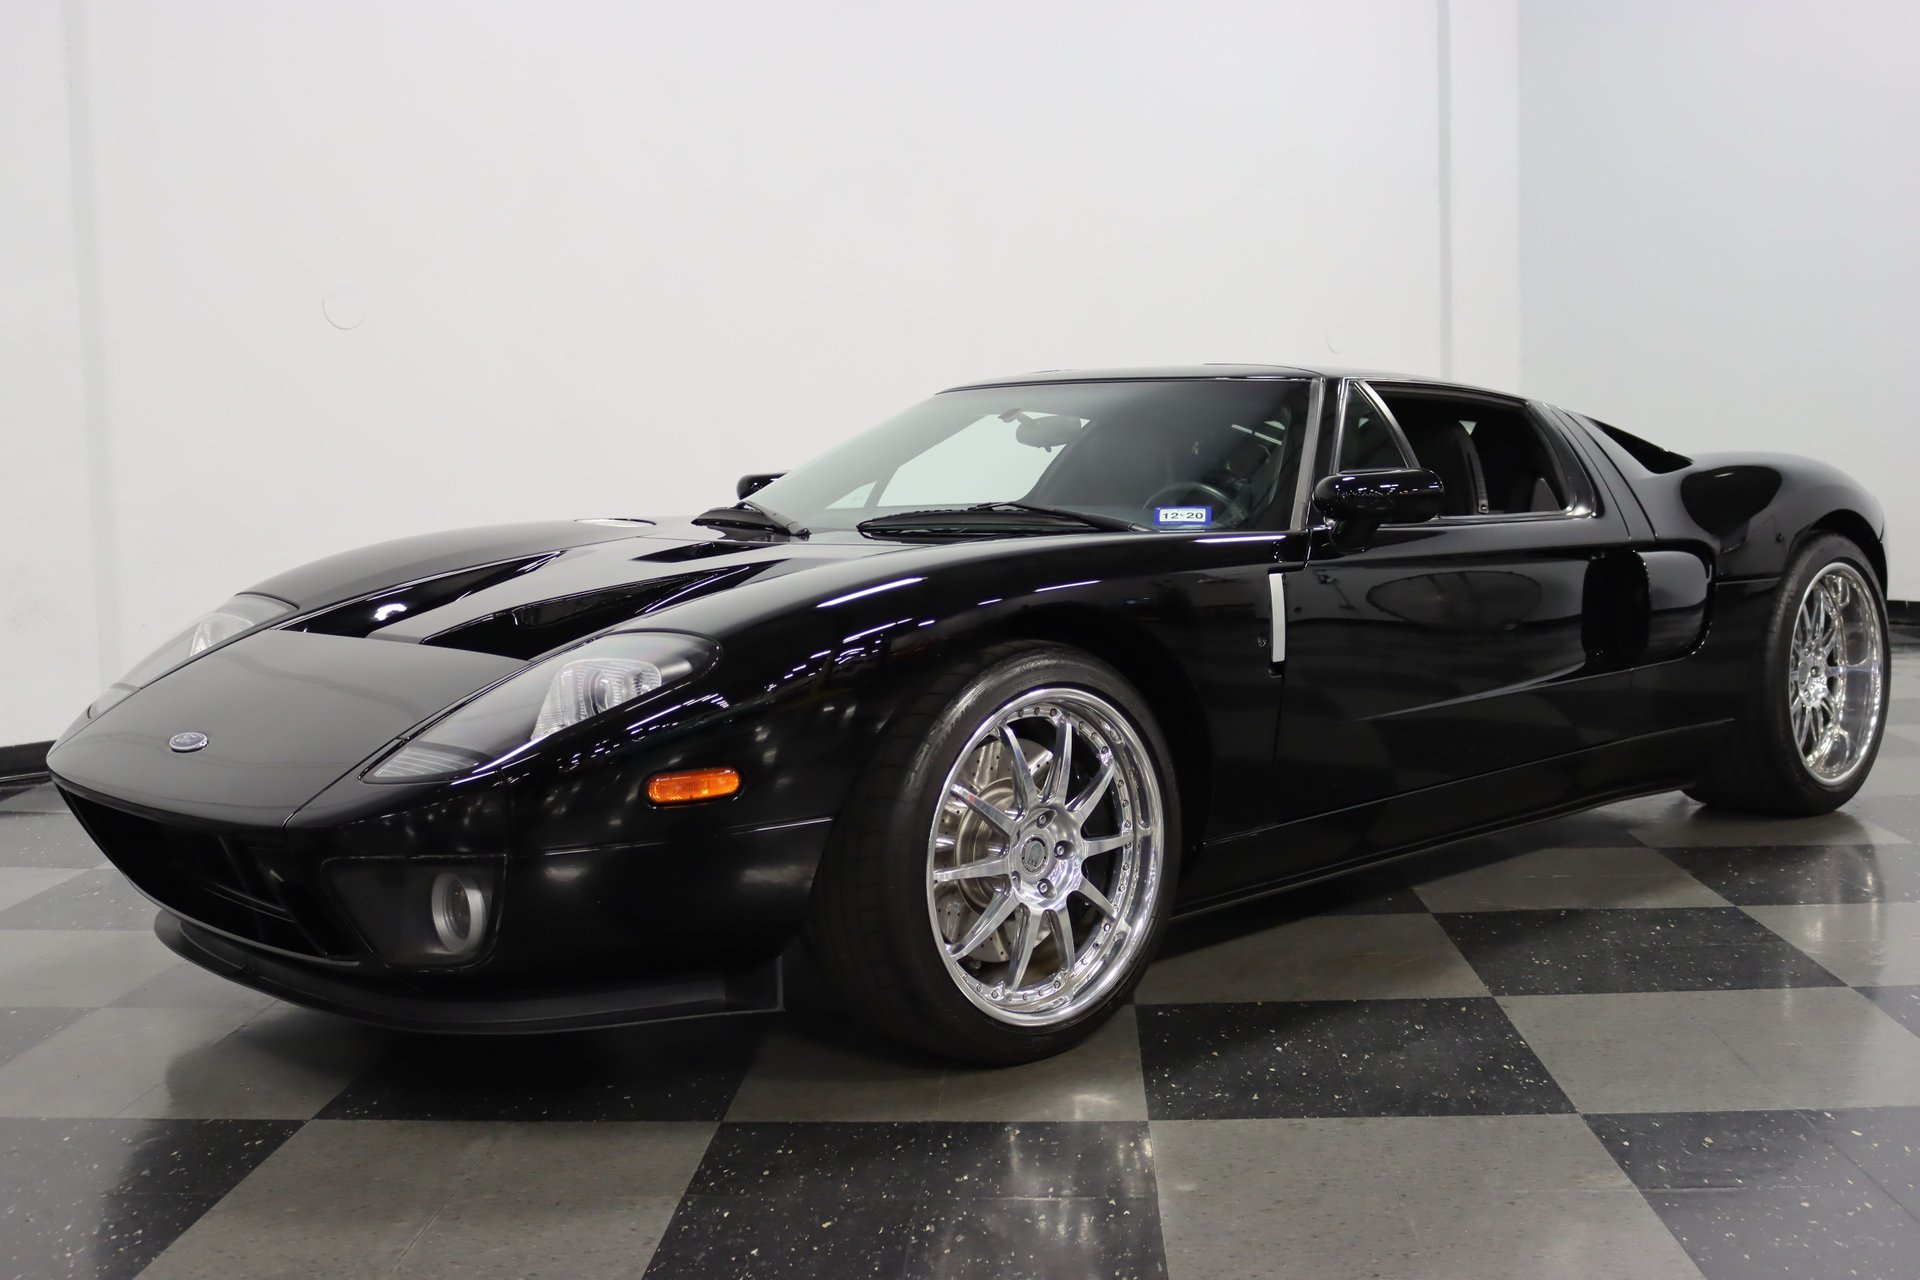 Twin Turbo 05 Ford Gt With 840 Hp Is A Bit Of A Bargain Carscoops